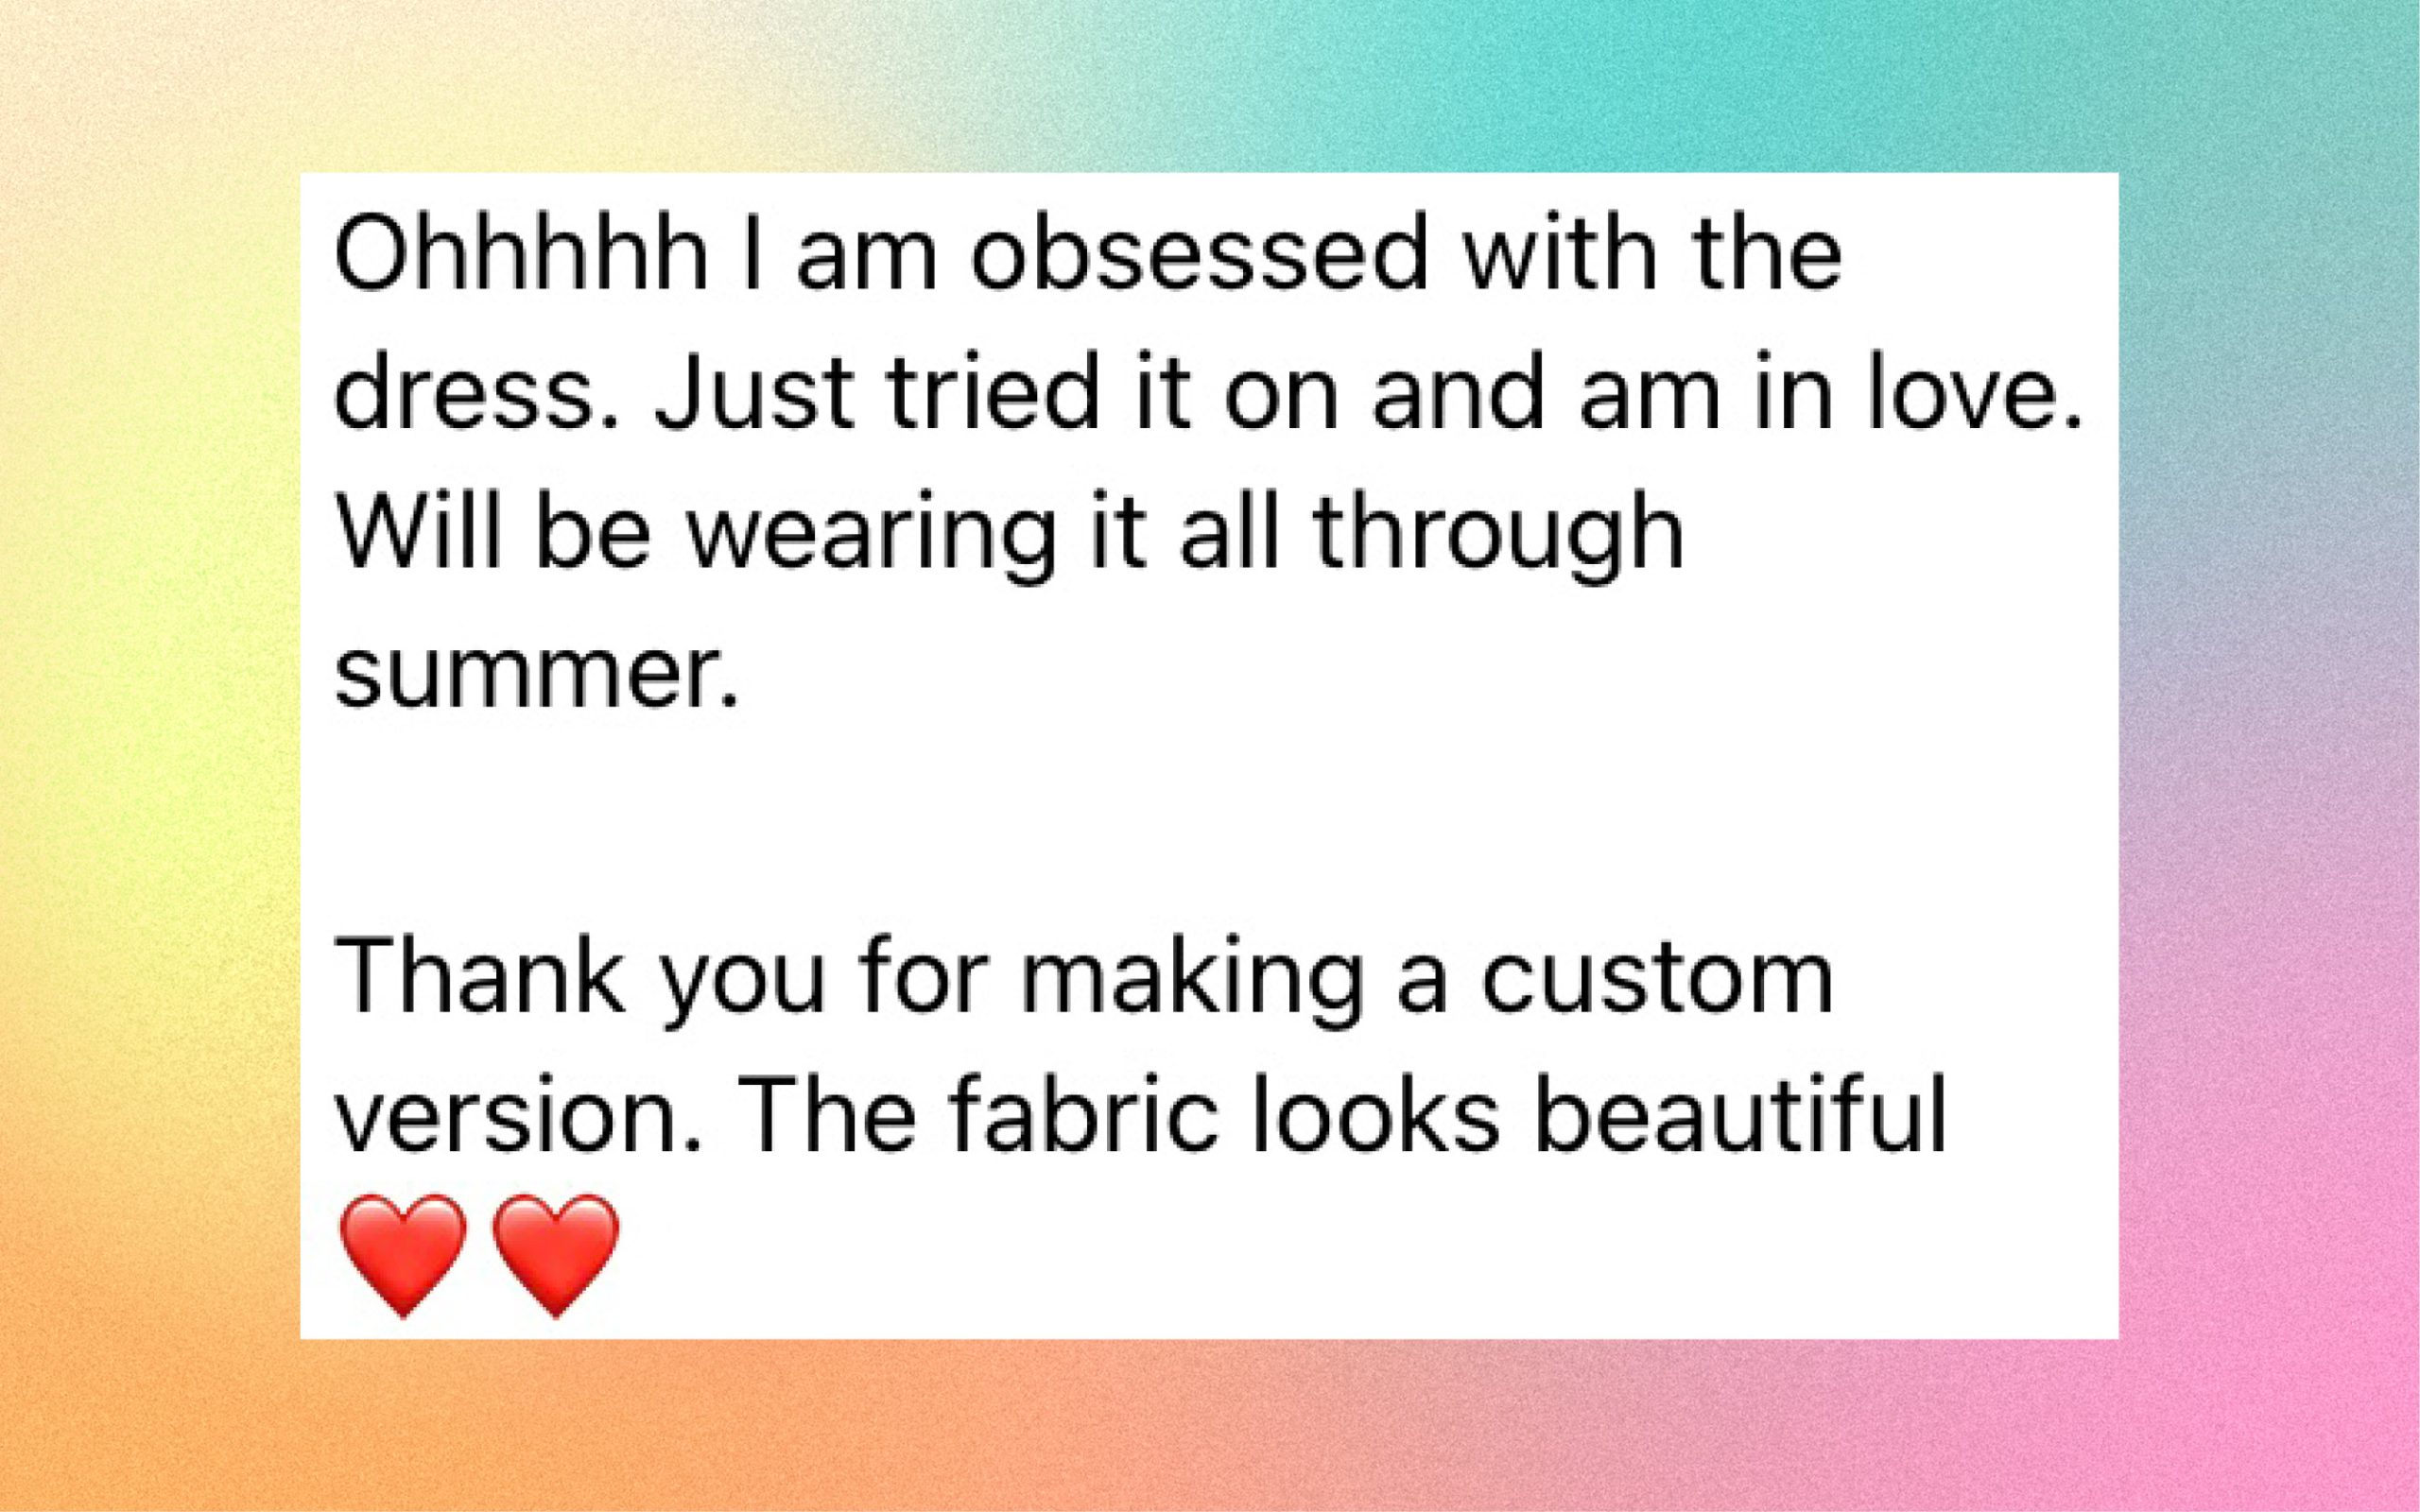 Ohhhhh I am obsessed with the dress. Just tried it on and am in love. I'll be wearing it all through summer. Thank you for making a custom version. The fabric looks beautiful. 